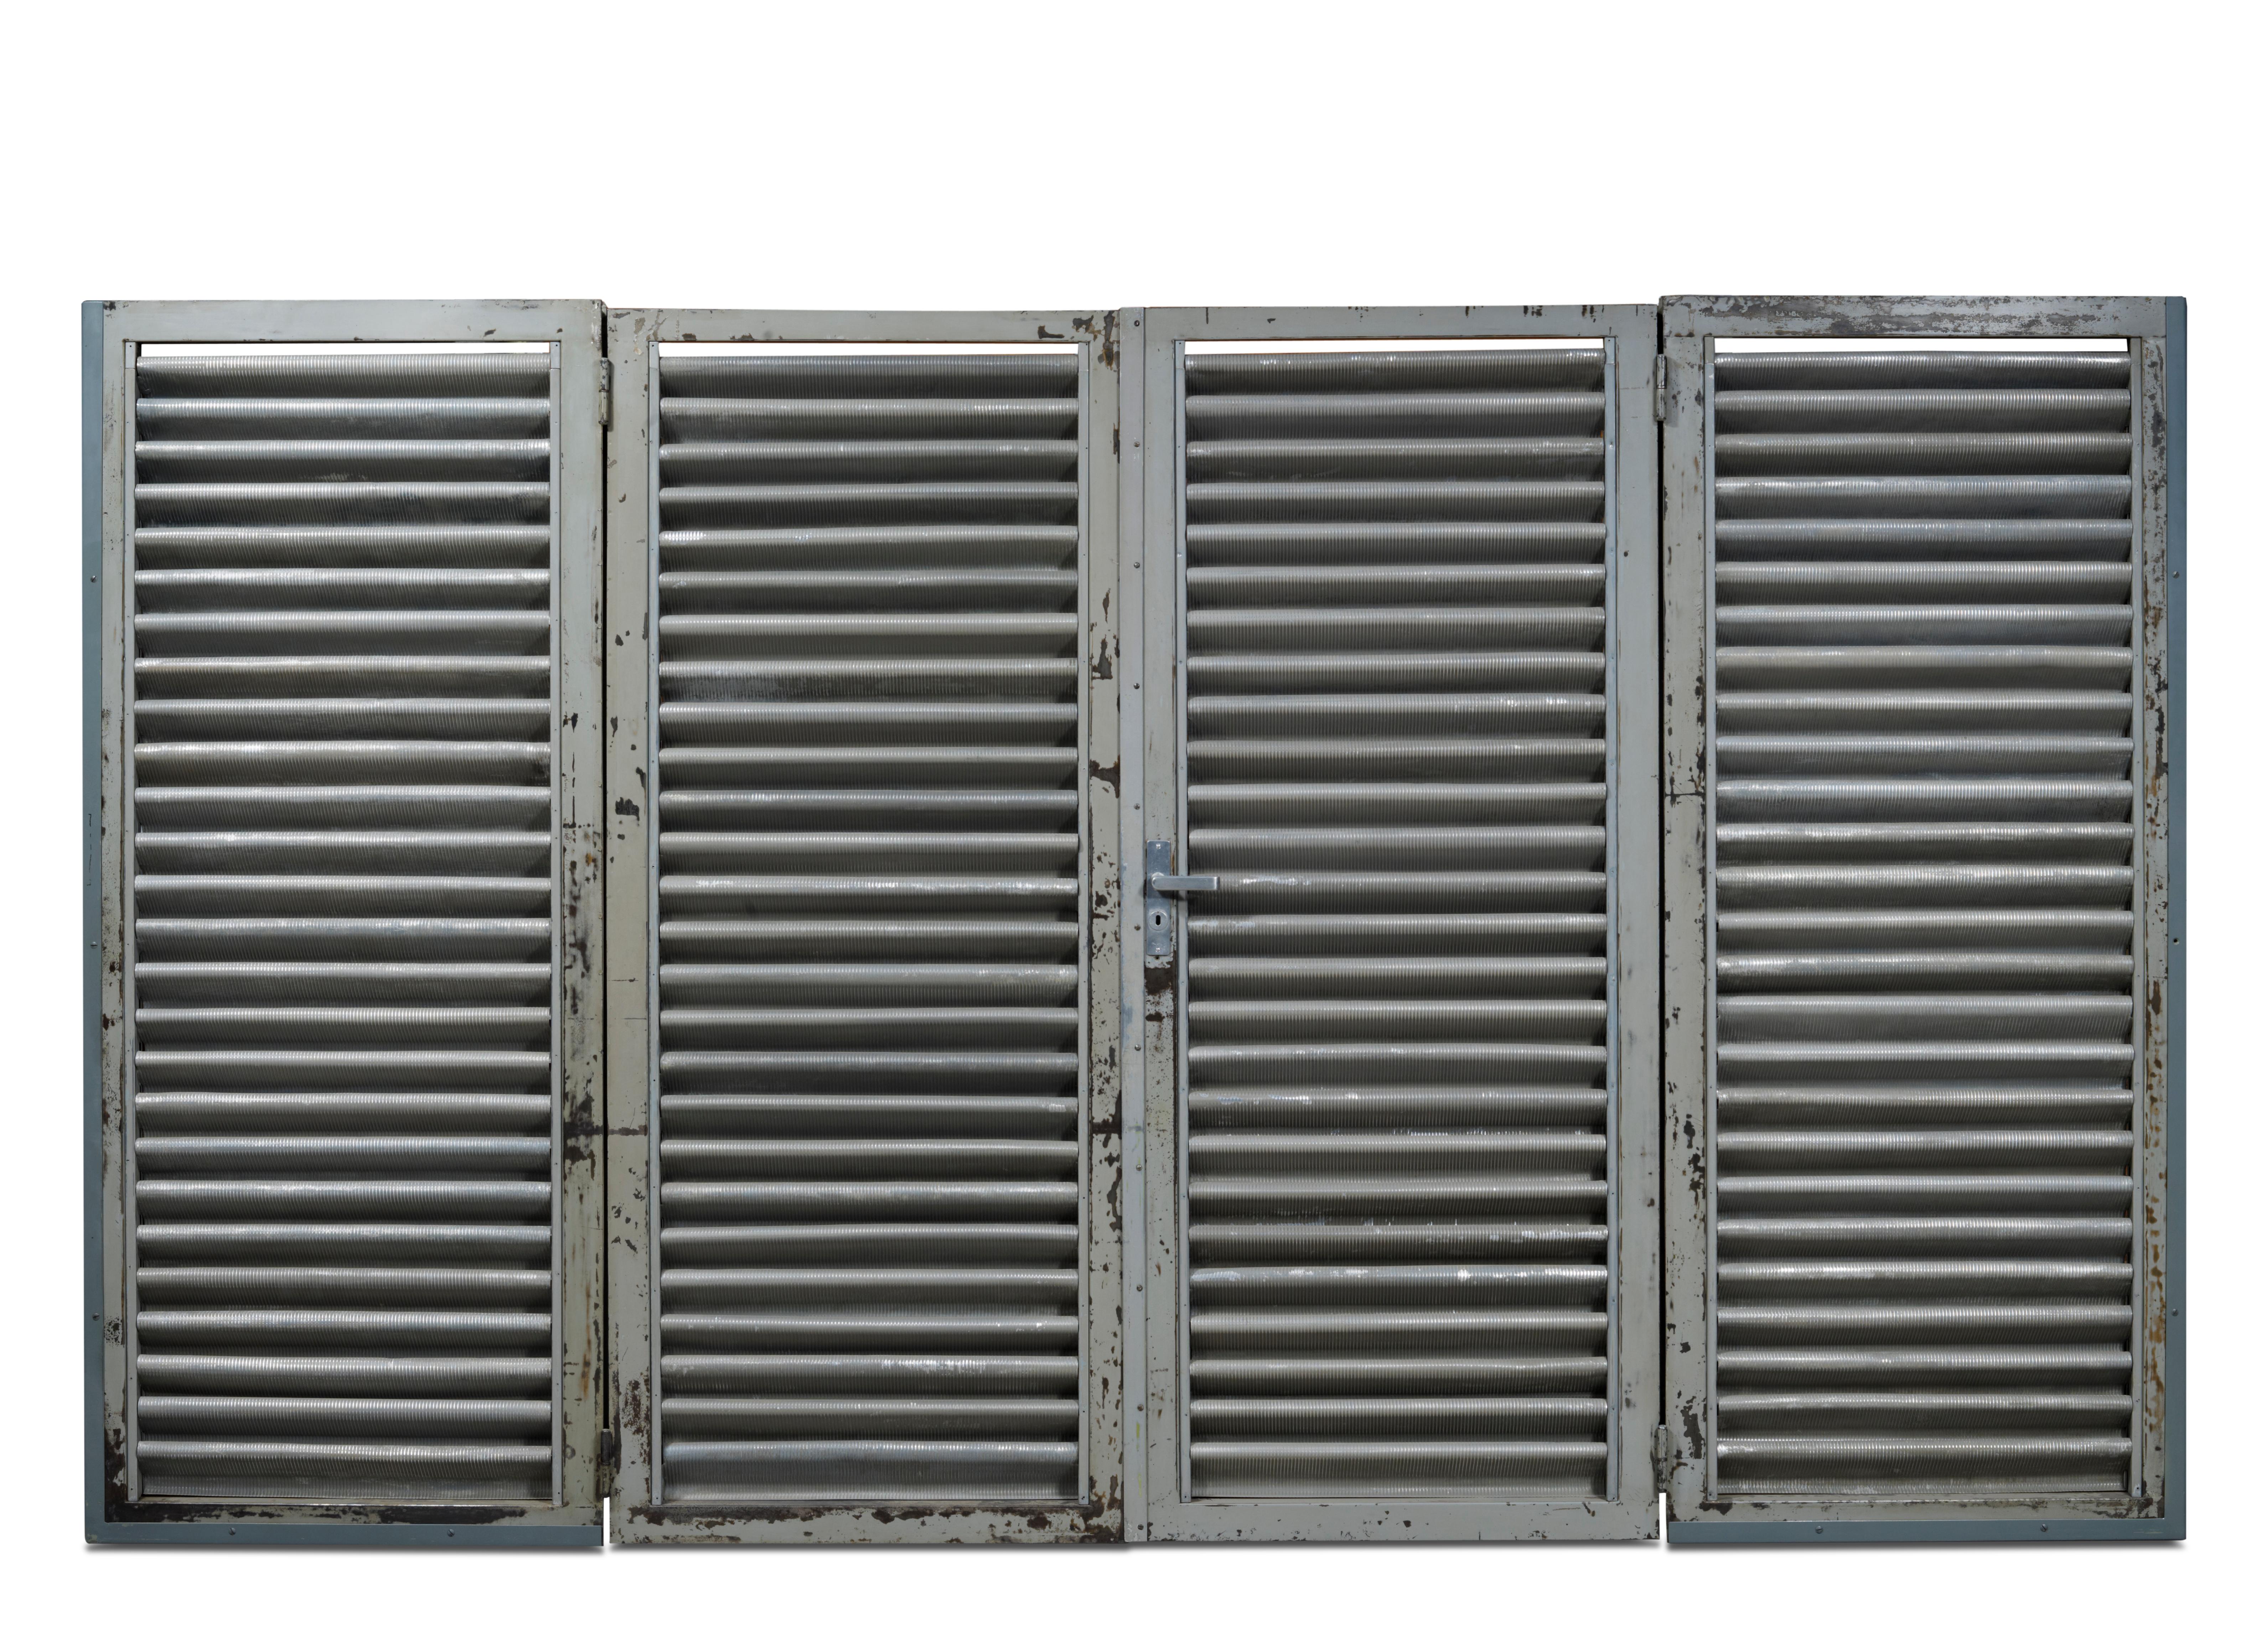 Jean PROUVE 
Room divider with 4-paneled louvers, 1952.

Provenance :
- Six from big Unité d'habitation Air France apartments at Brazzaville, Congo. Nine copies found in relatively good condition.

Stationary slats in streaked aluminum, jambs